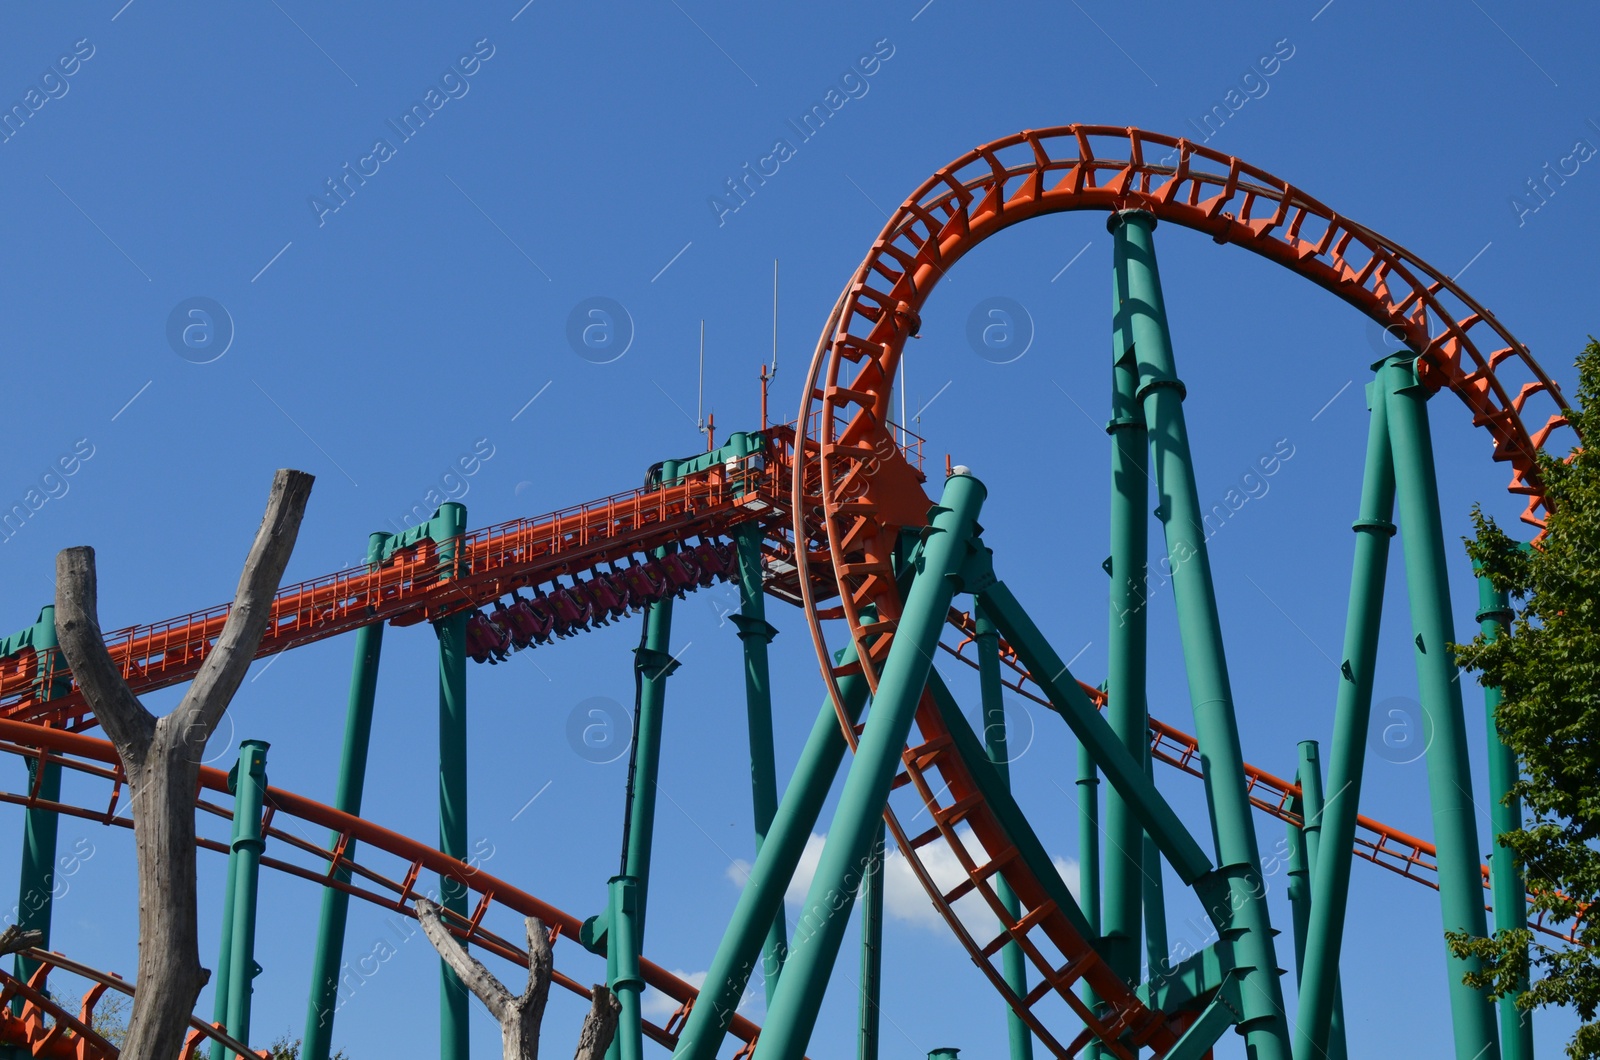 Photo of Amusement park. Beautiful large colorful rollercoaster against blue sky, low angle view